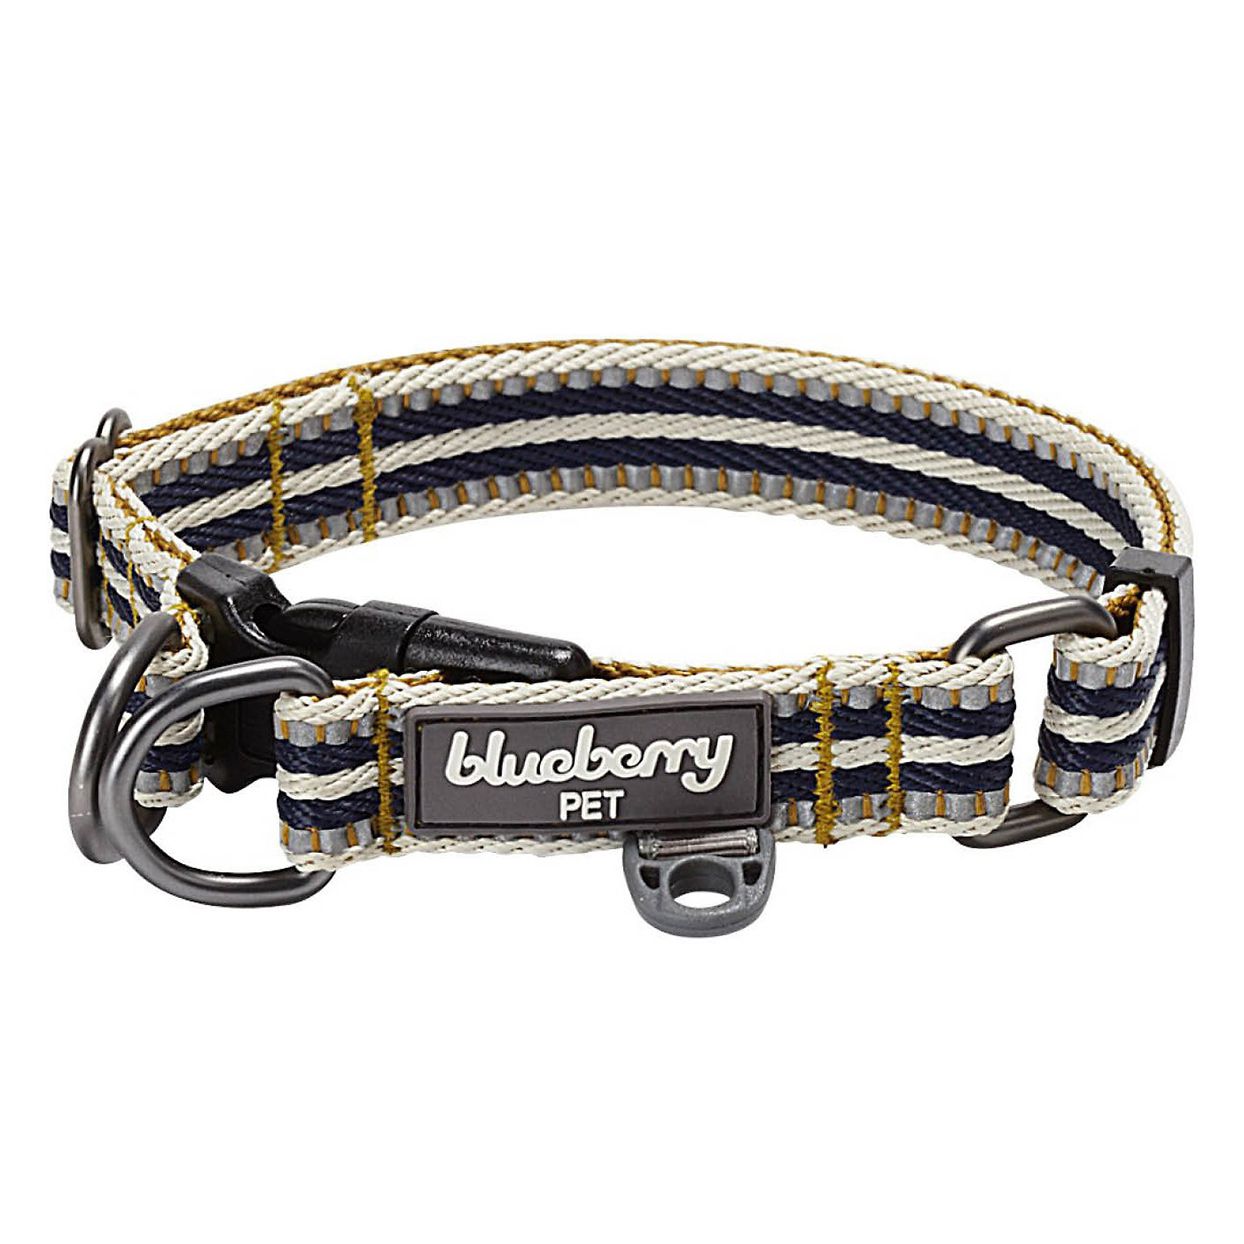 Product photo of a Blueberry Pet Multi-Colored Stripe Polyester Reflective Dog Collar on a white background